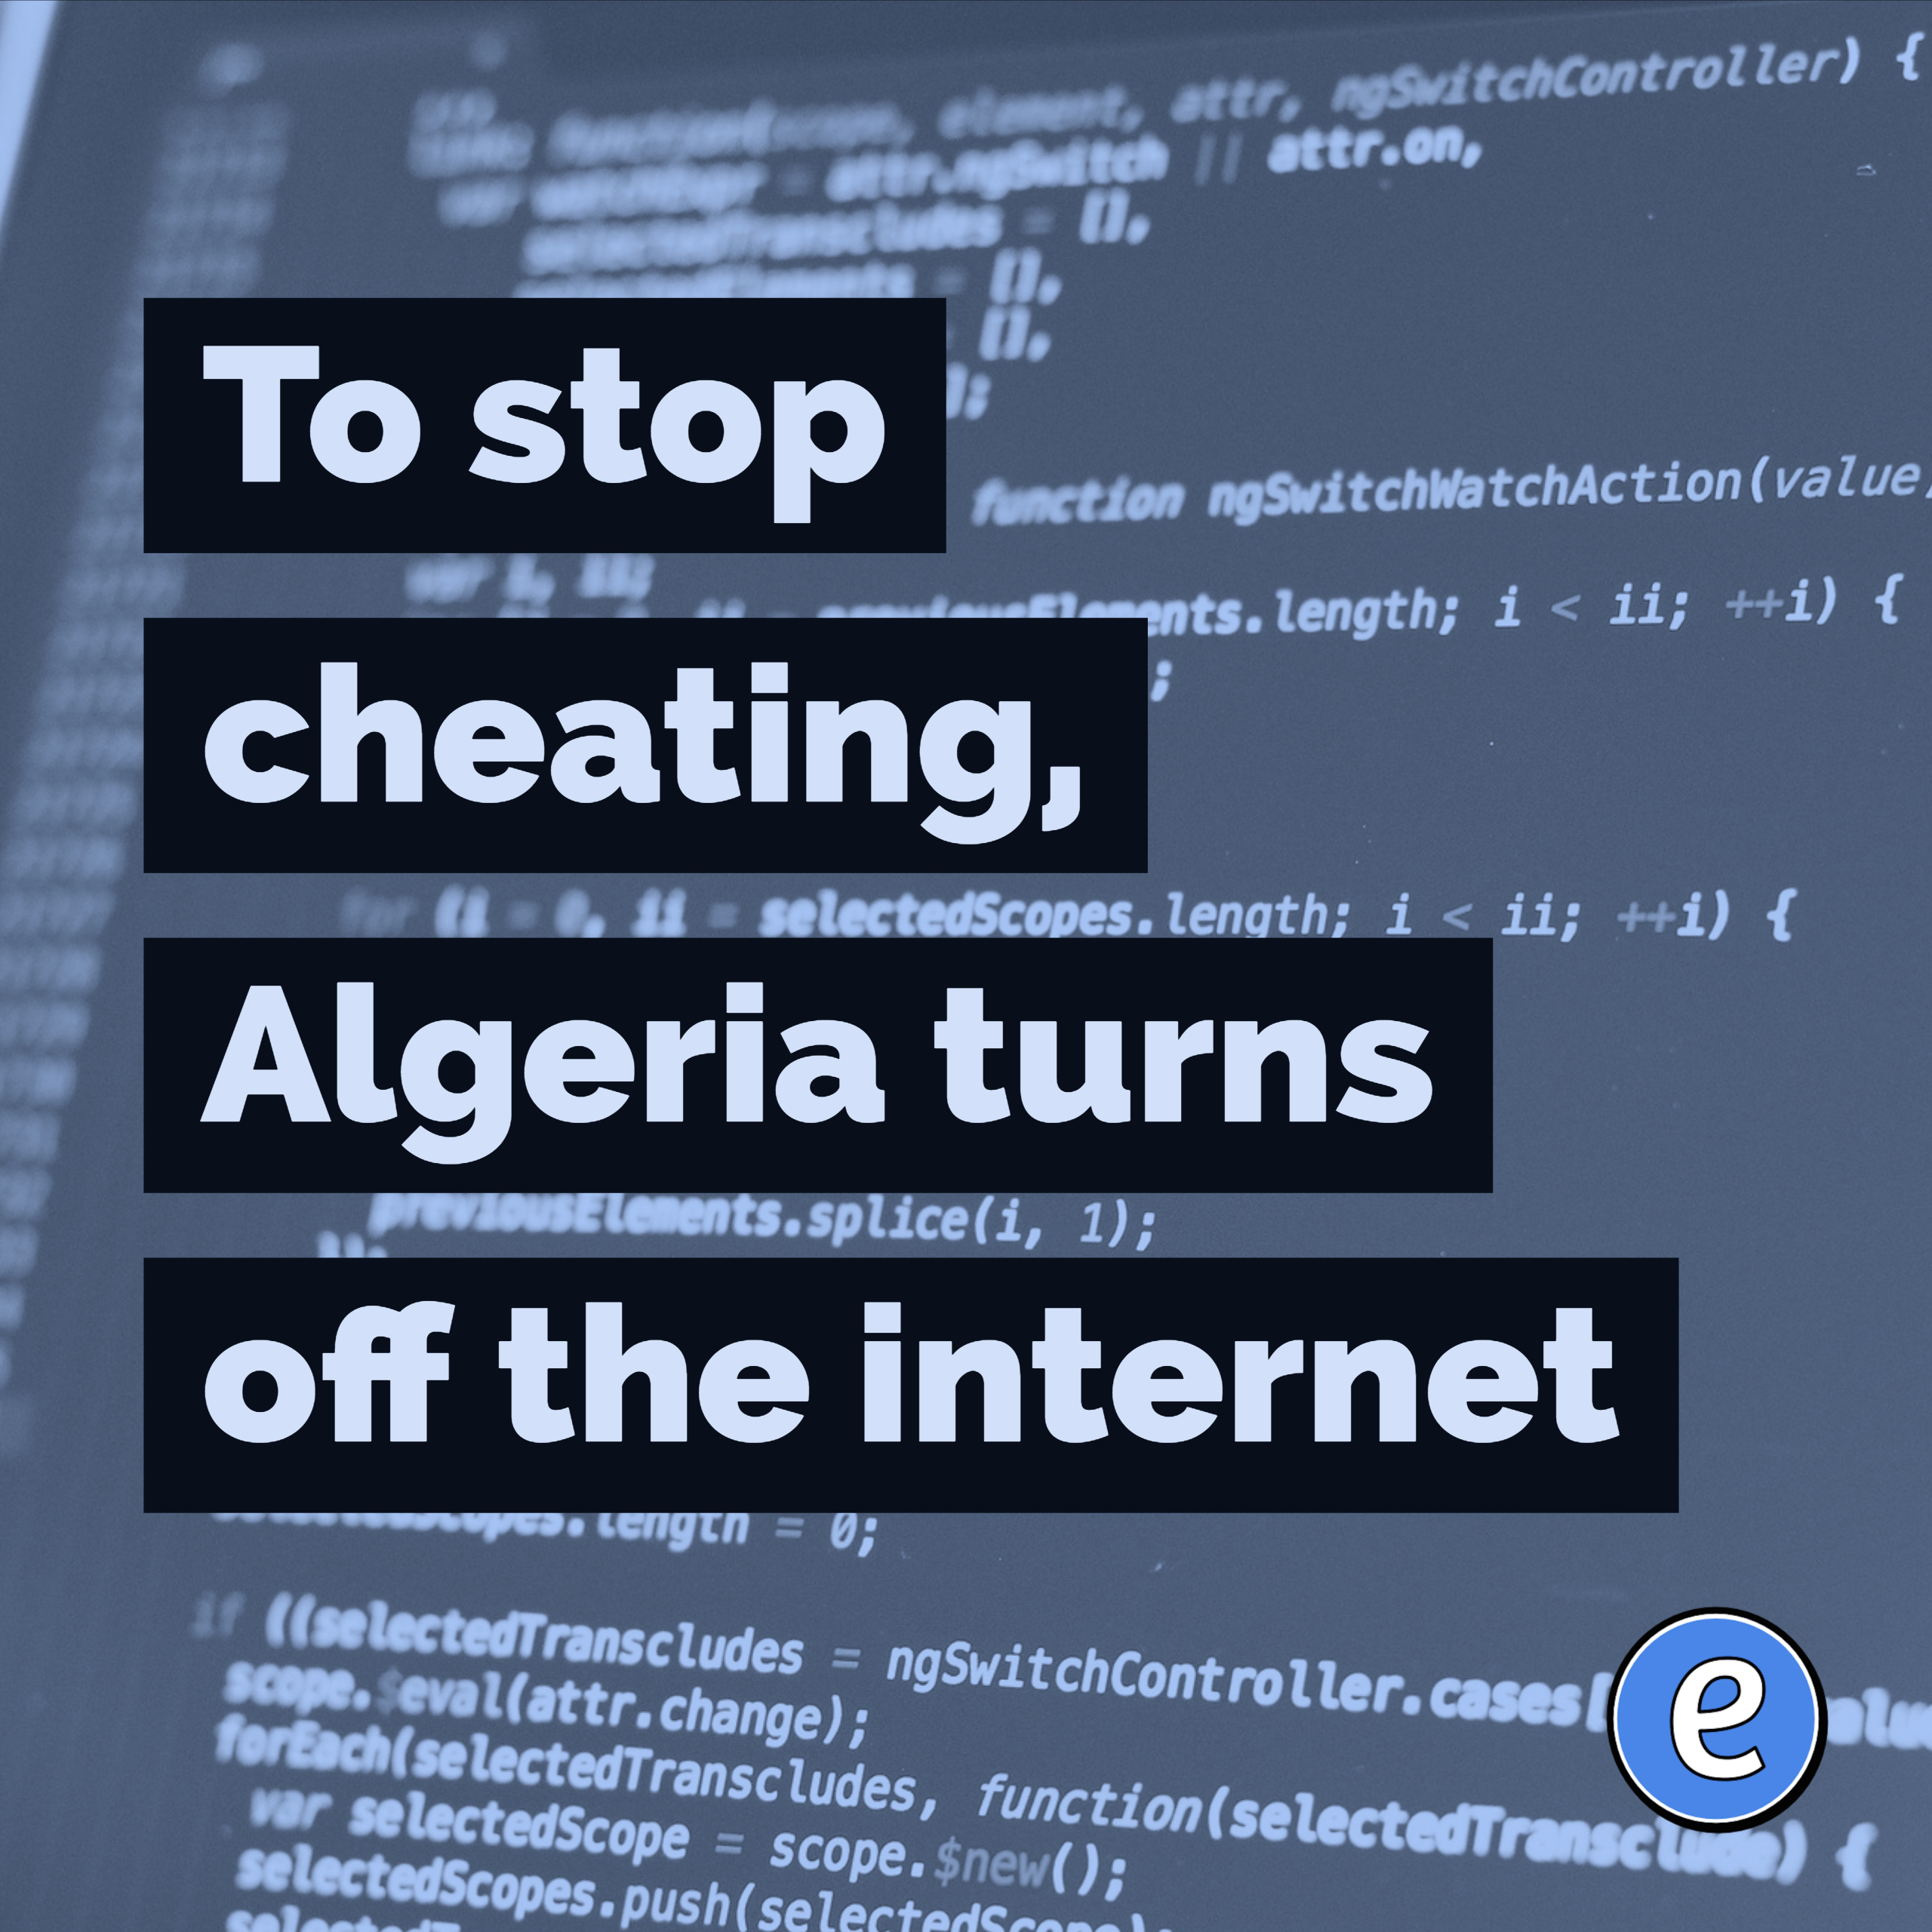 To stop cheating, Algeria turns off the internet